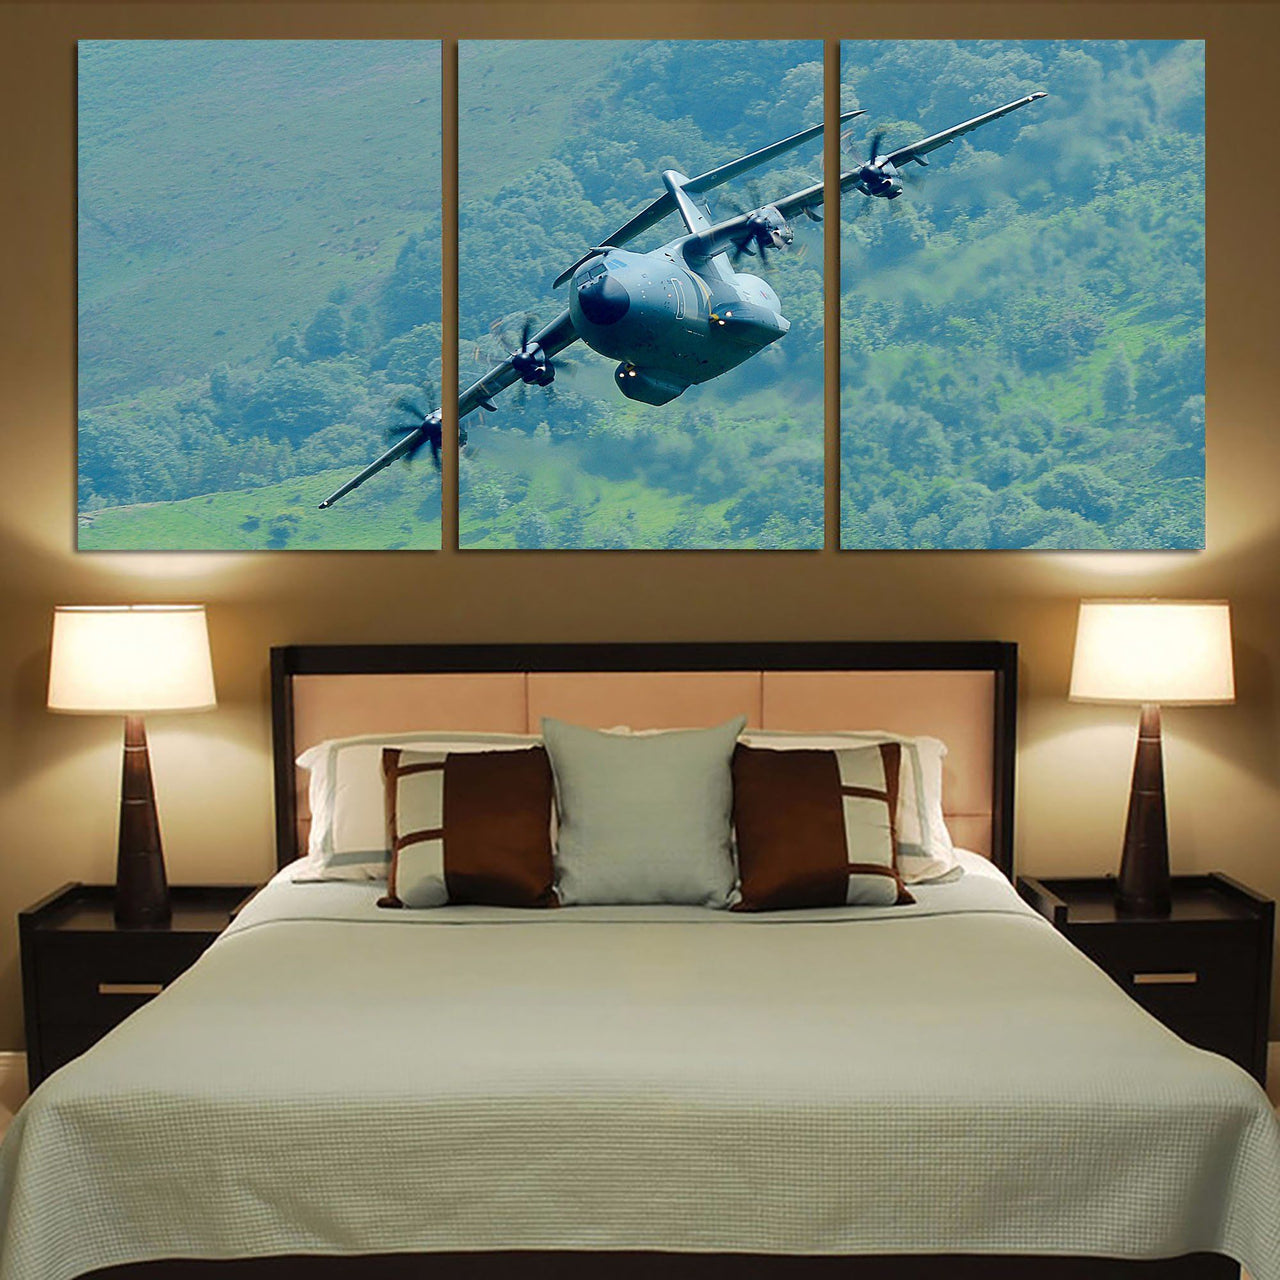 Cruising Airbus A400M Printed Canvas Posters (3 Pieces) Aviation Shop 